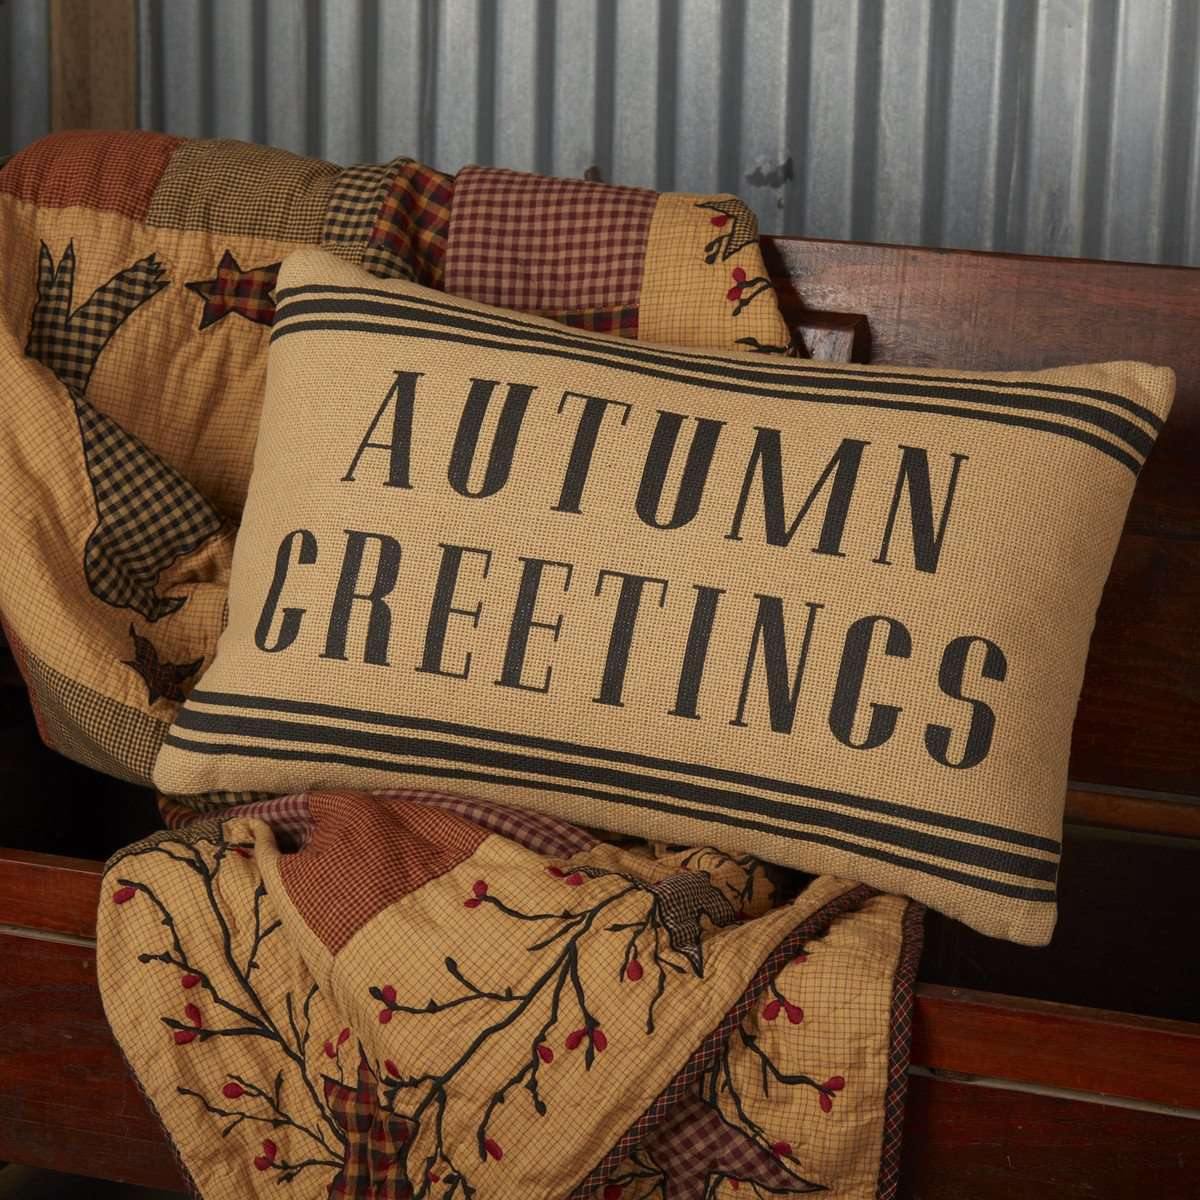 Heritage Farms Autumn Greetings Pillow 14x22 VHC Brands